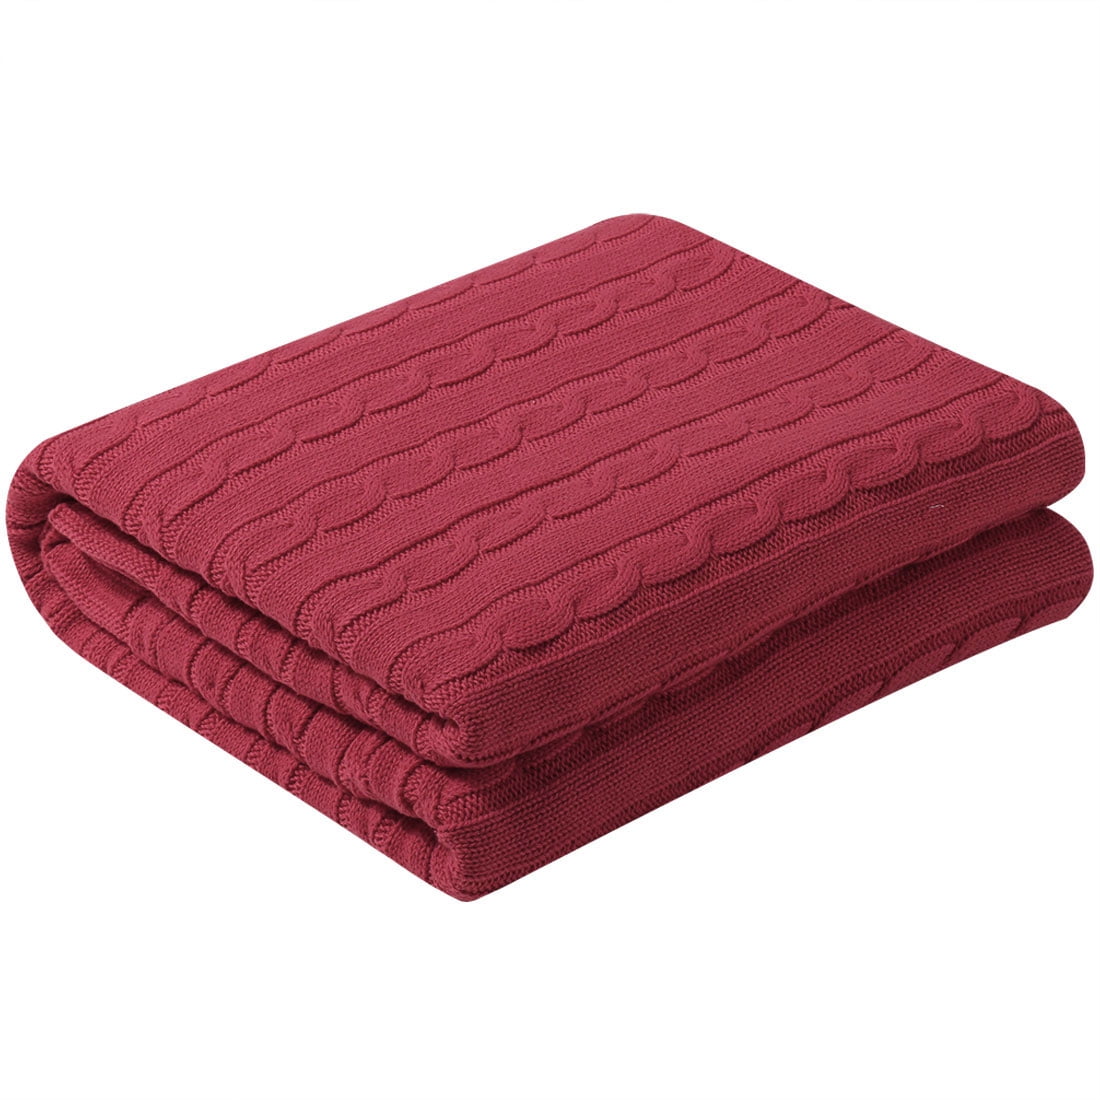 Table Mat Blanket Red 31,5 x 41,5 cm 4 Pieces NEW 